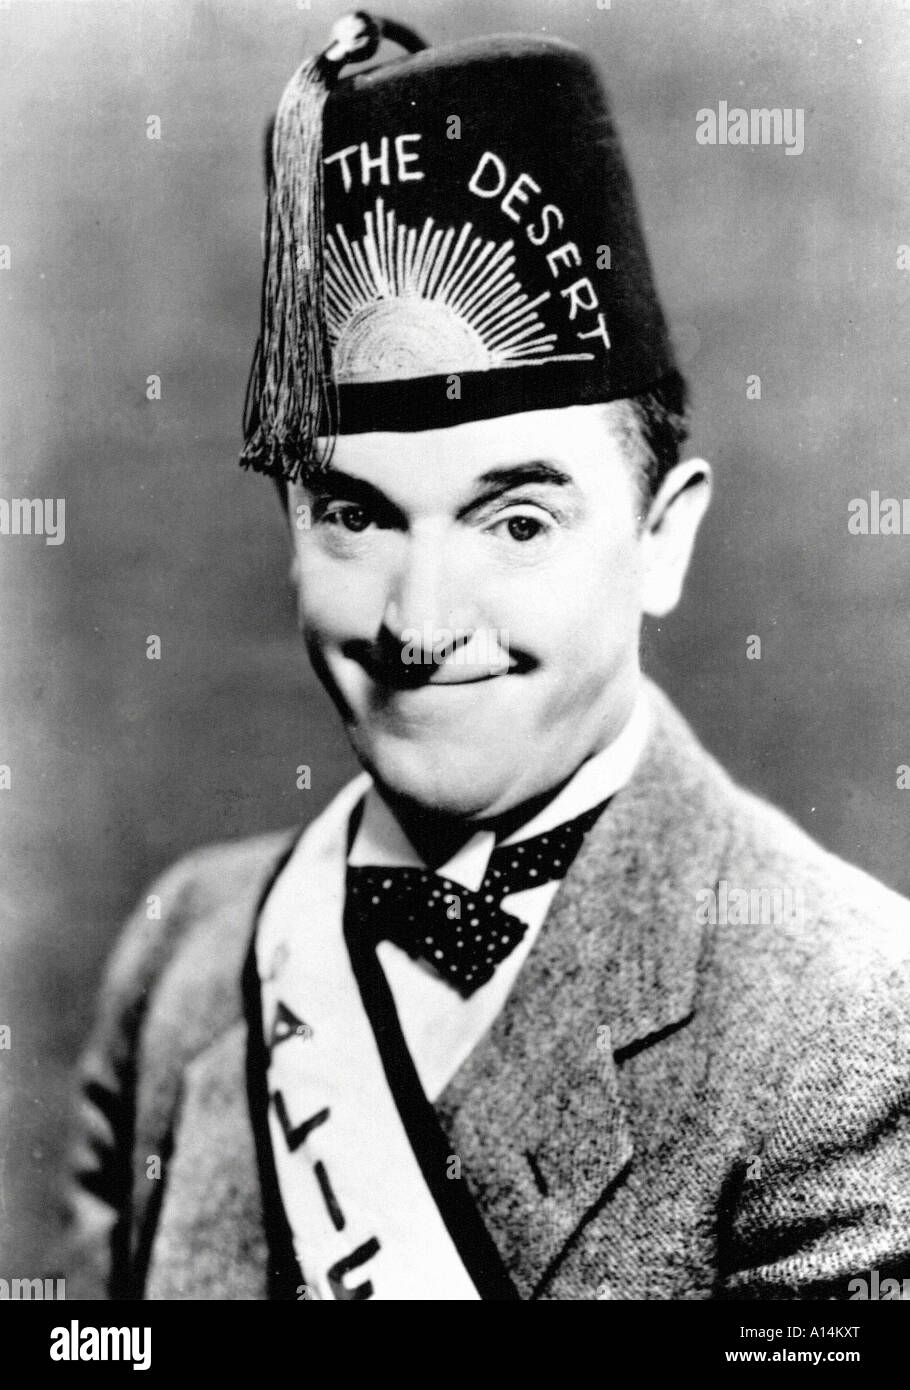 The sons of the desert 1934 William A Seiter Stan Laurel Stock Photo ...